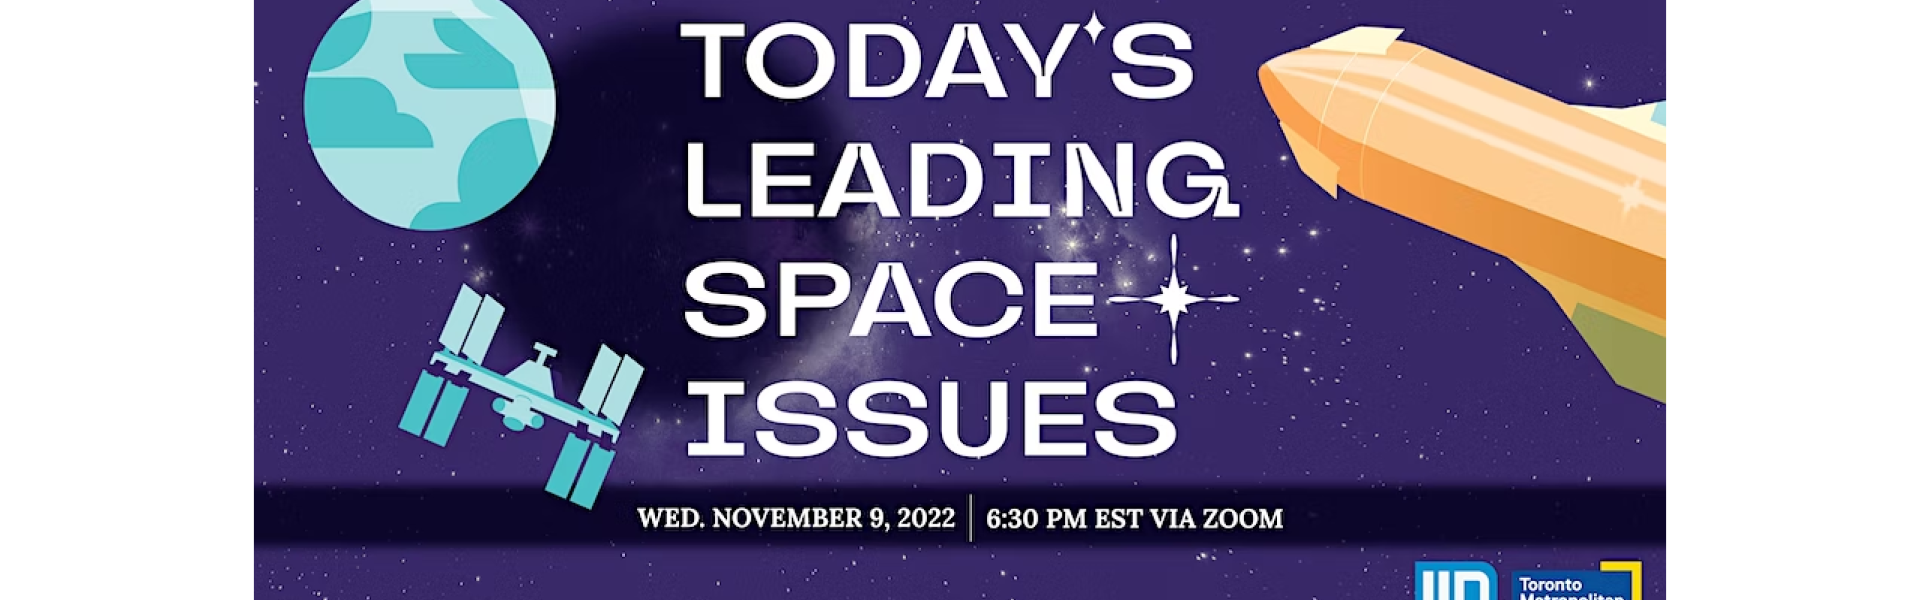 Today's Leading Space Issues